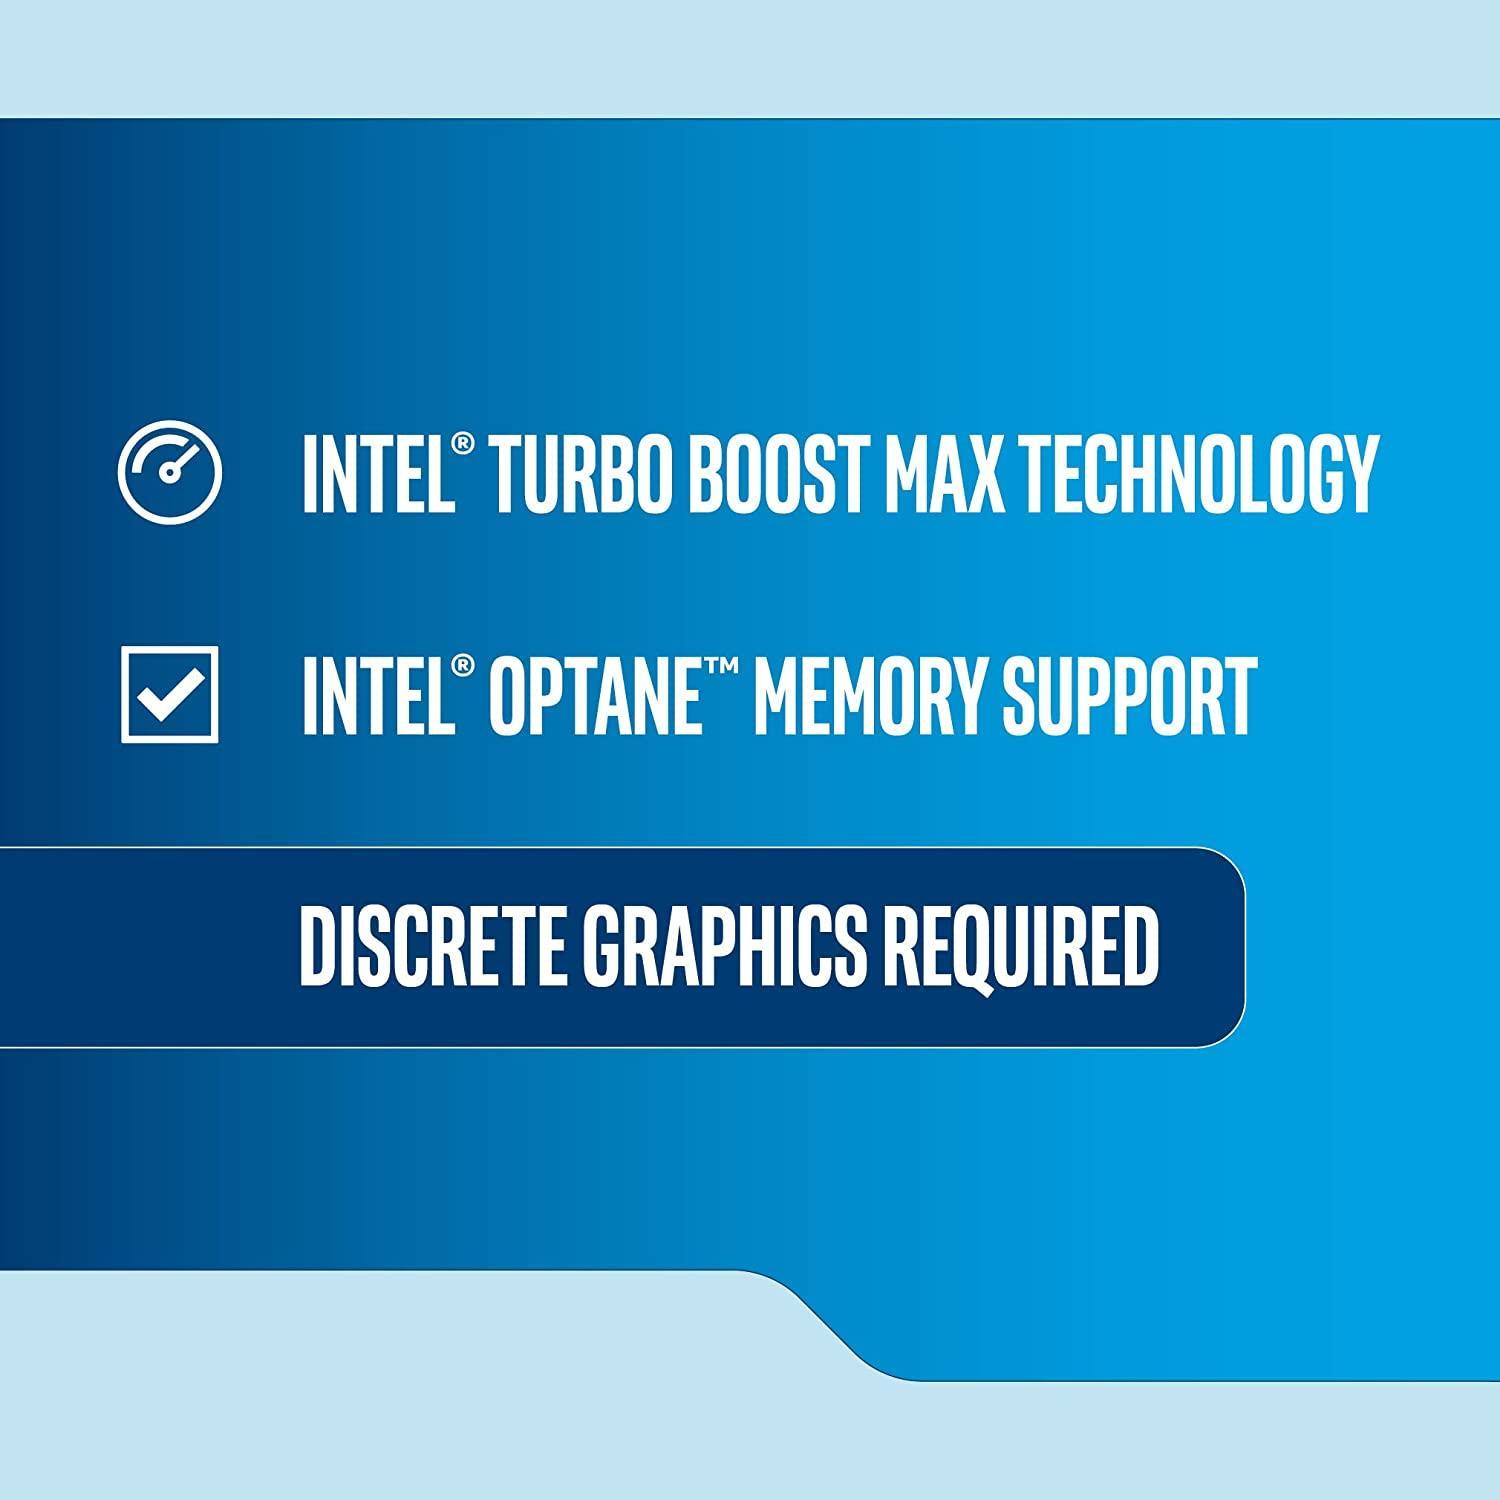 Intel® Core™ i5-9400F Processor (9M Cache, up to 4.10 GHz) - Store For Gamers